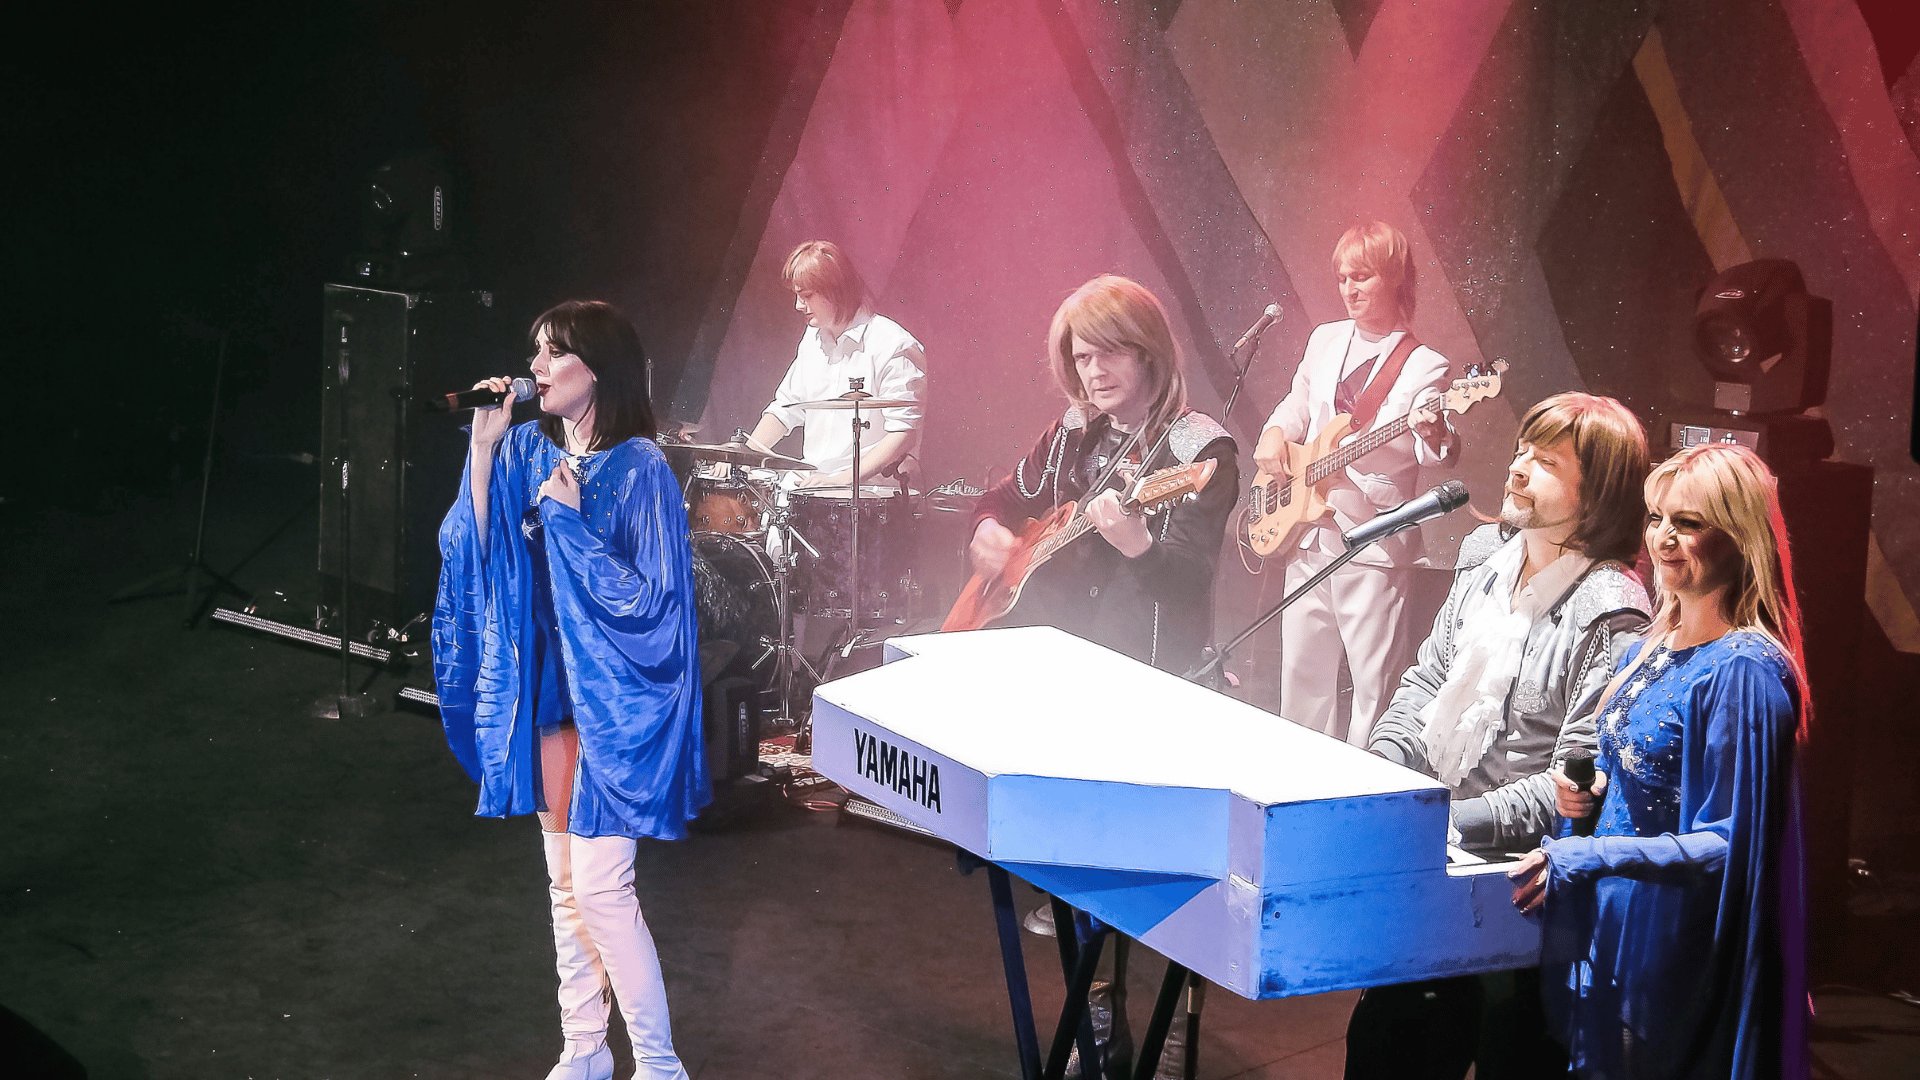 ABBA tribute band on stage singing